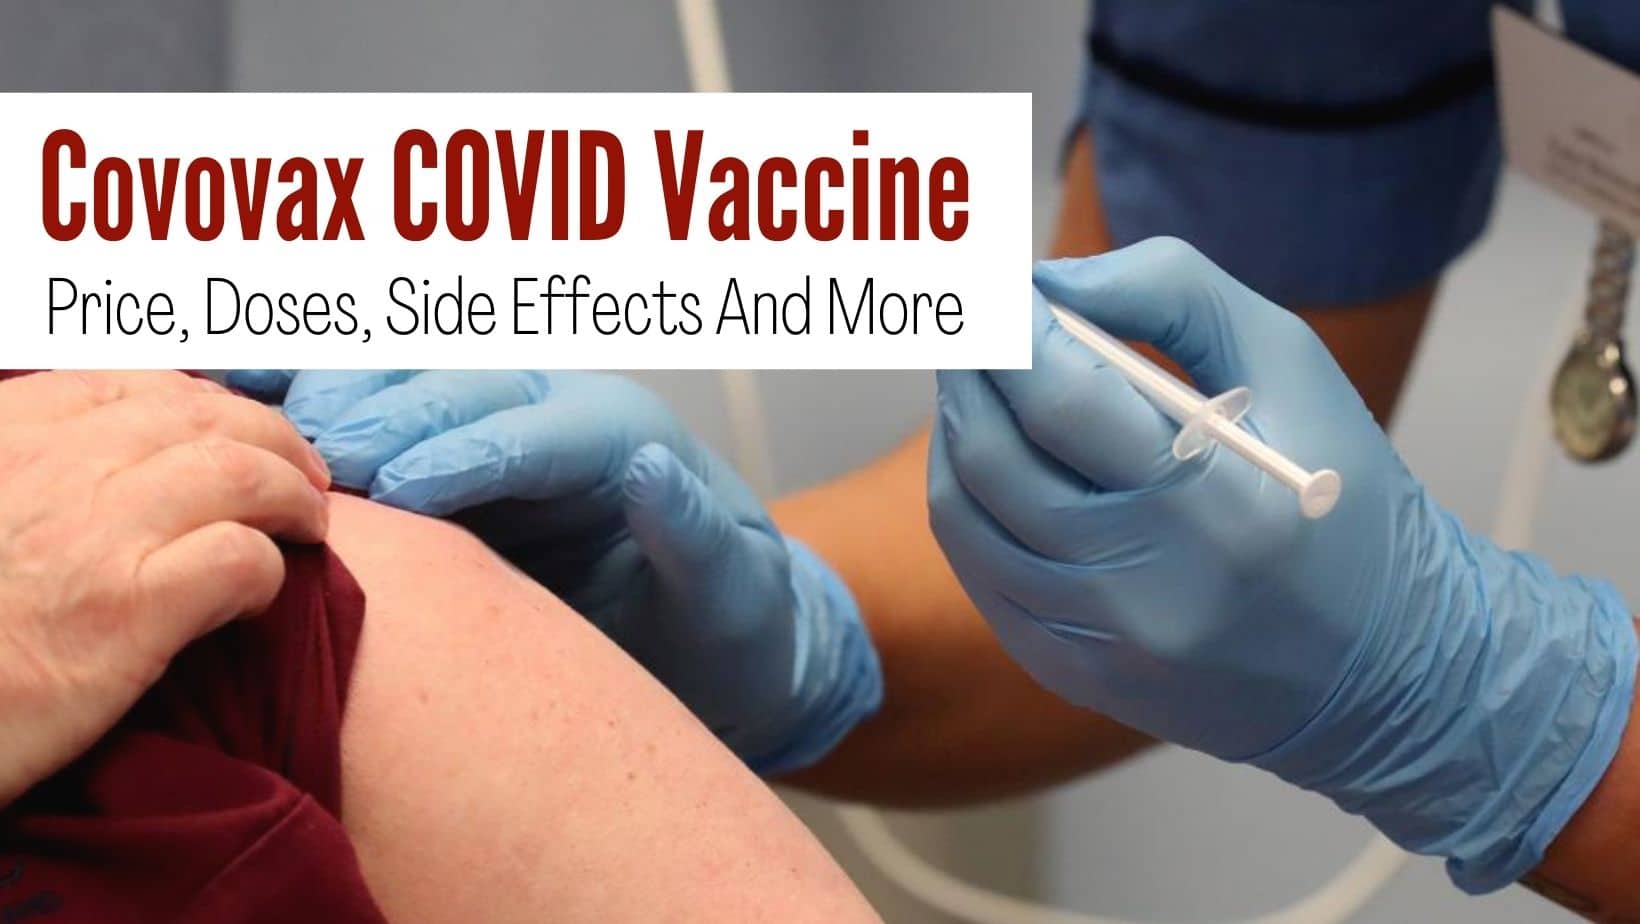 Covovax COVID-19 Approved For Kids Aged 7 To 11 Years: Price, Doses, Side Effects And Other Details